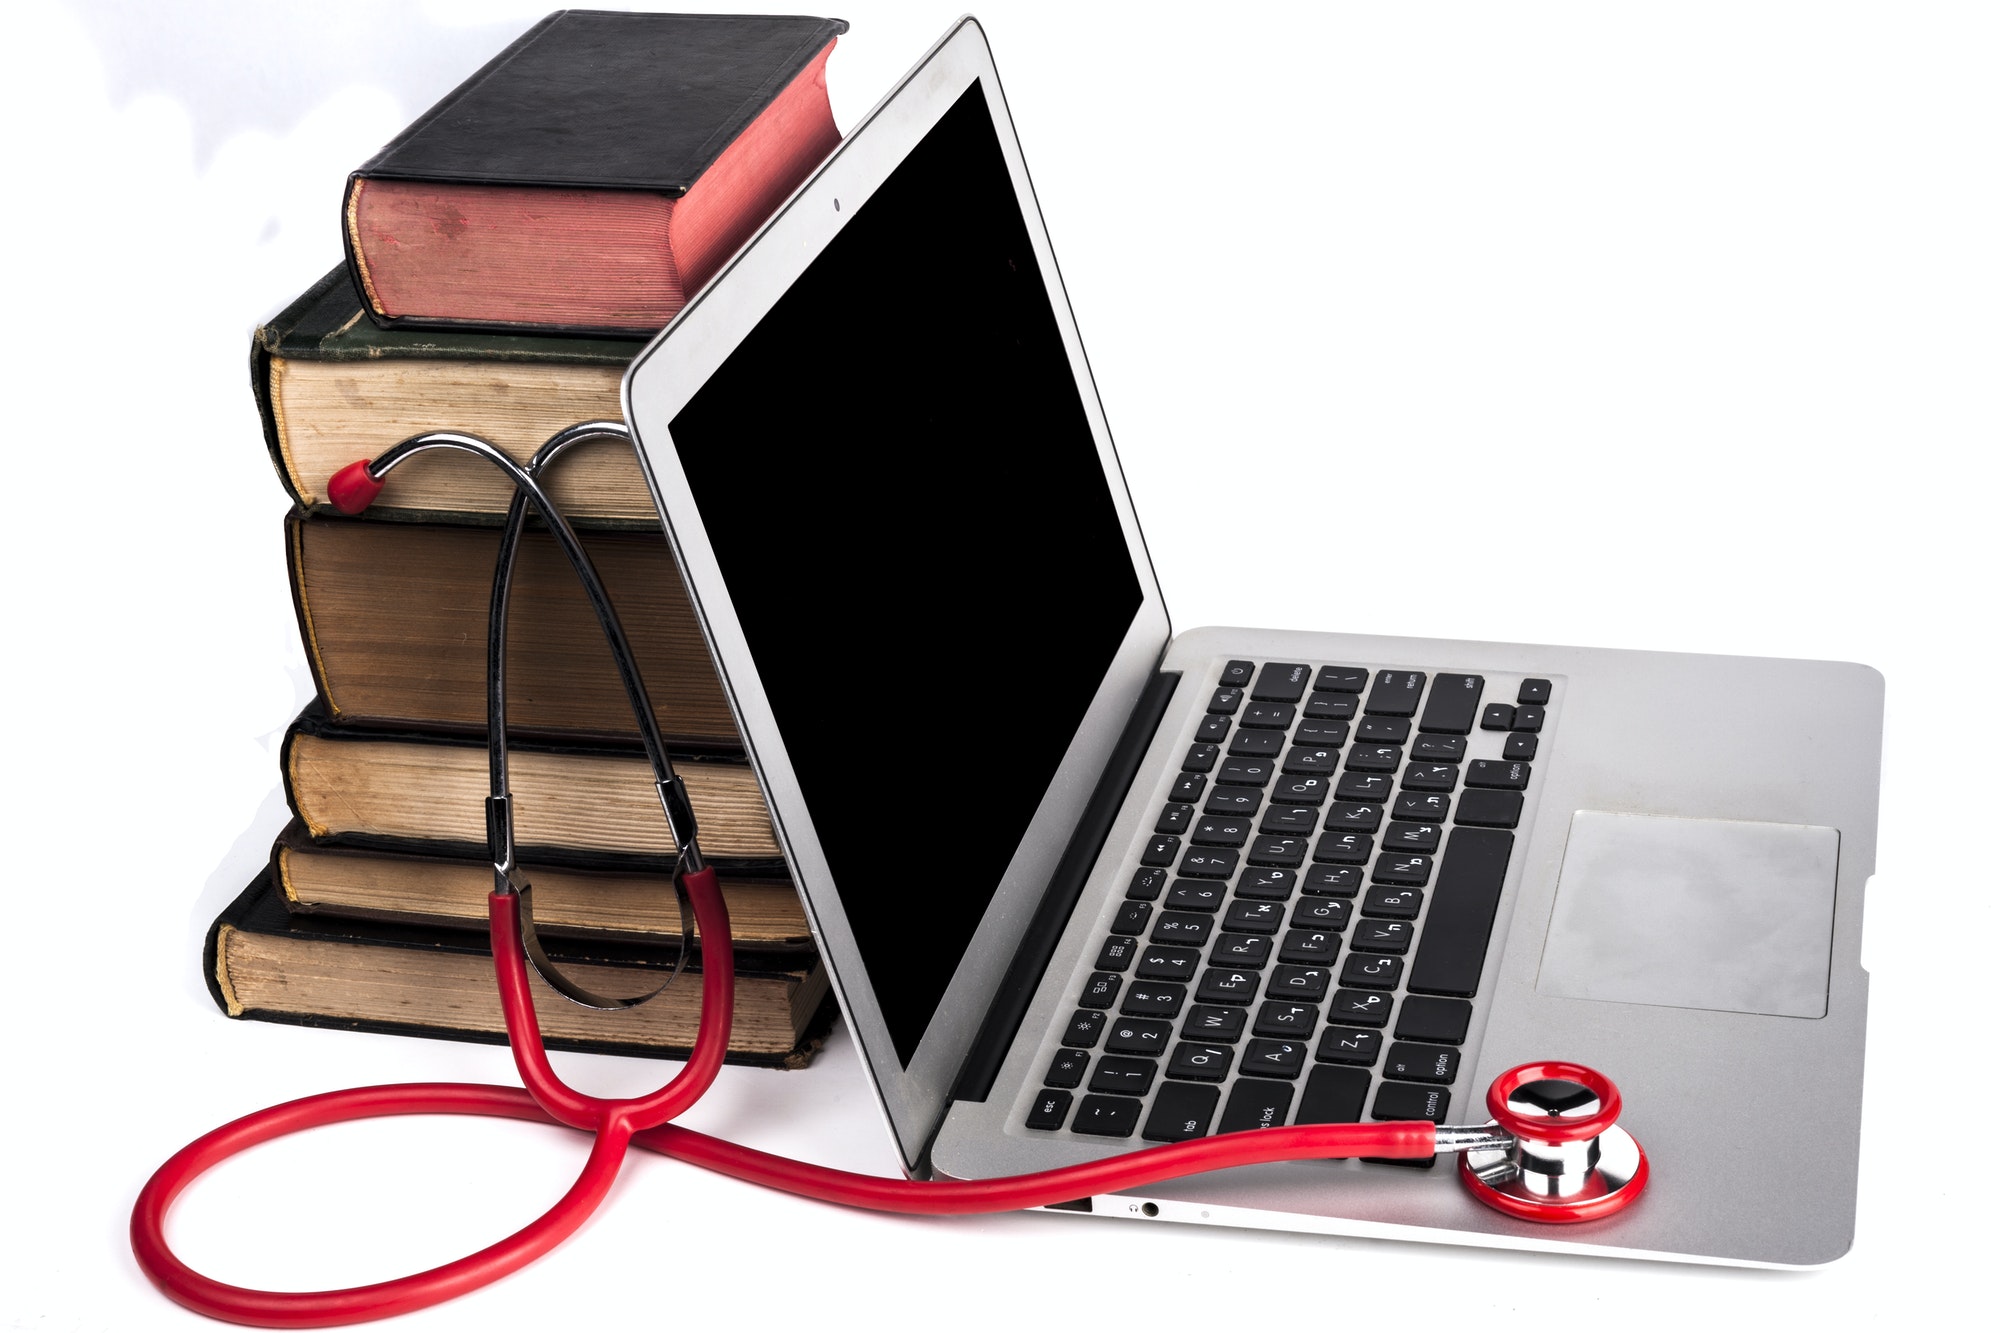 Red Stethoscope and Laptop